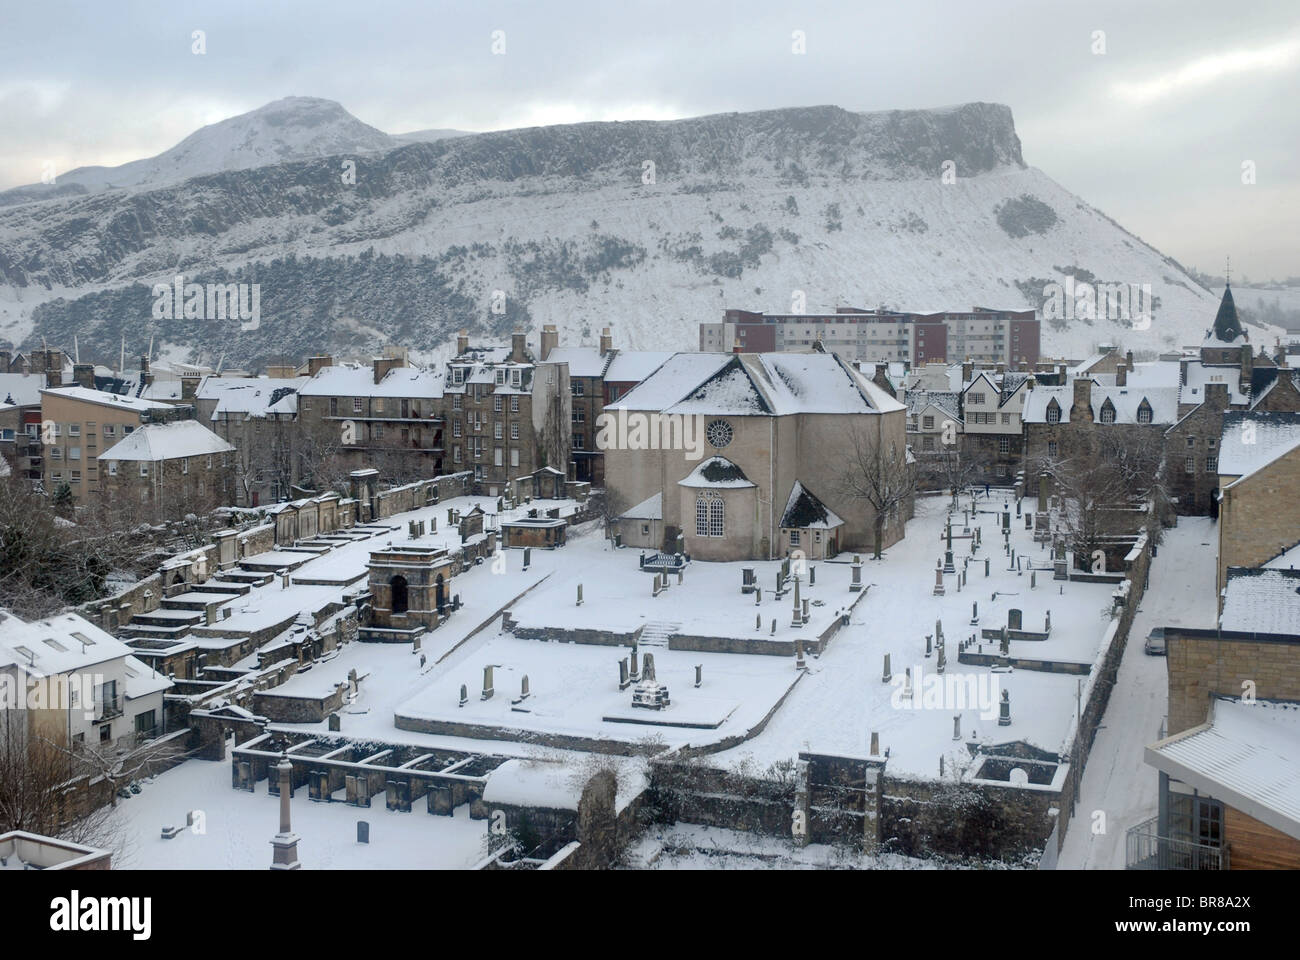 A wintry urban landscape, looking over the 17th century Canongate Kirk towards Salisbury Crags and Arthur's Seat in Edinburgh. Stock Photo